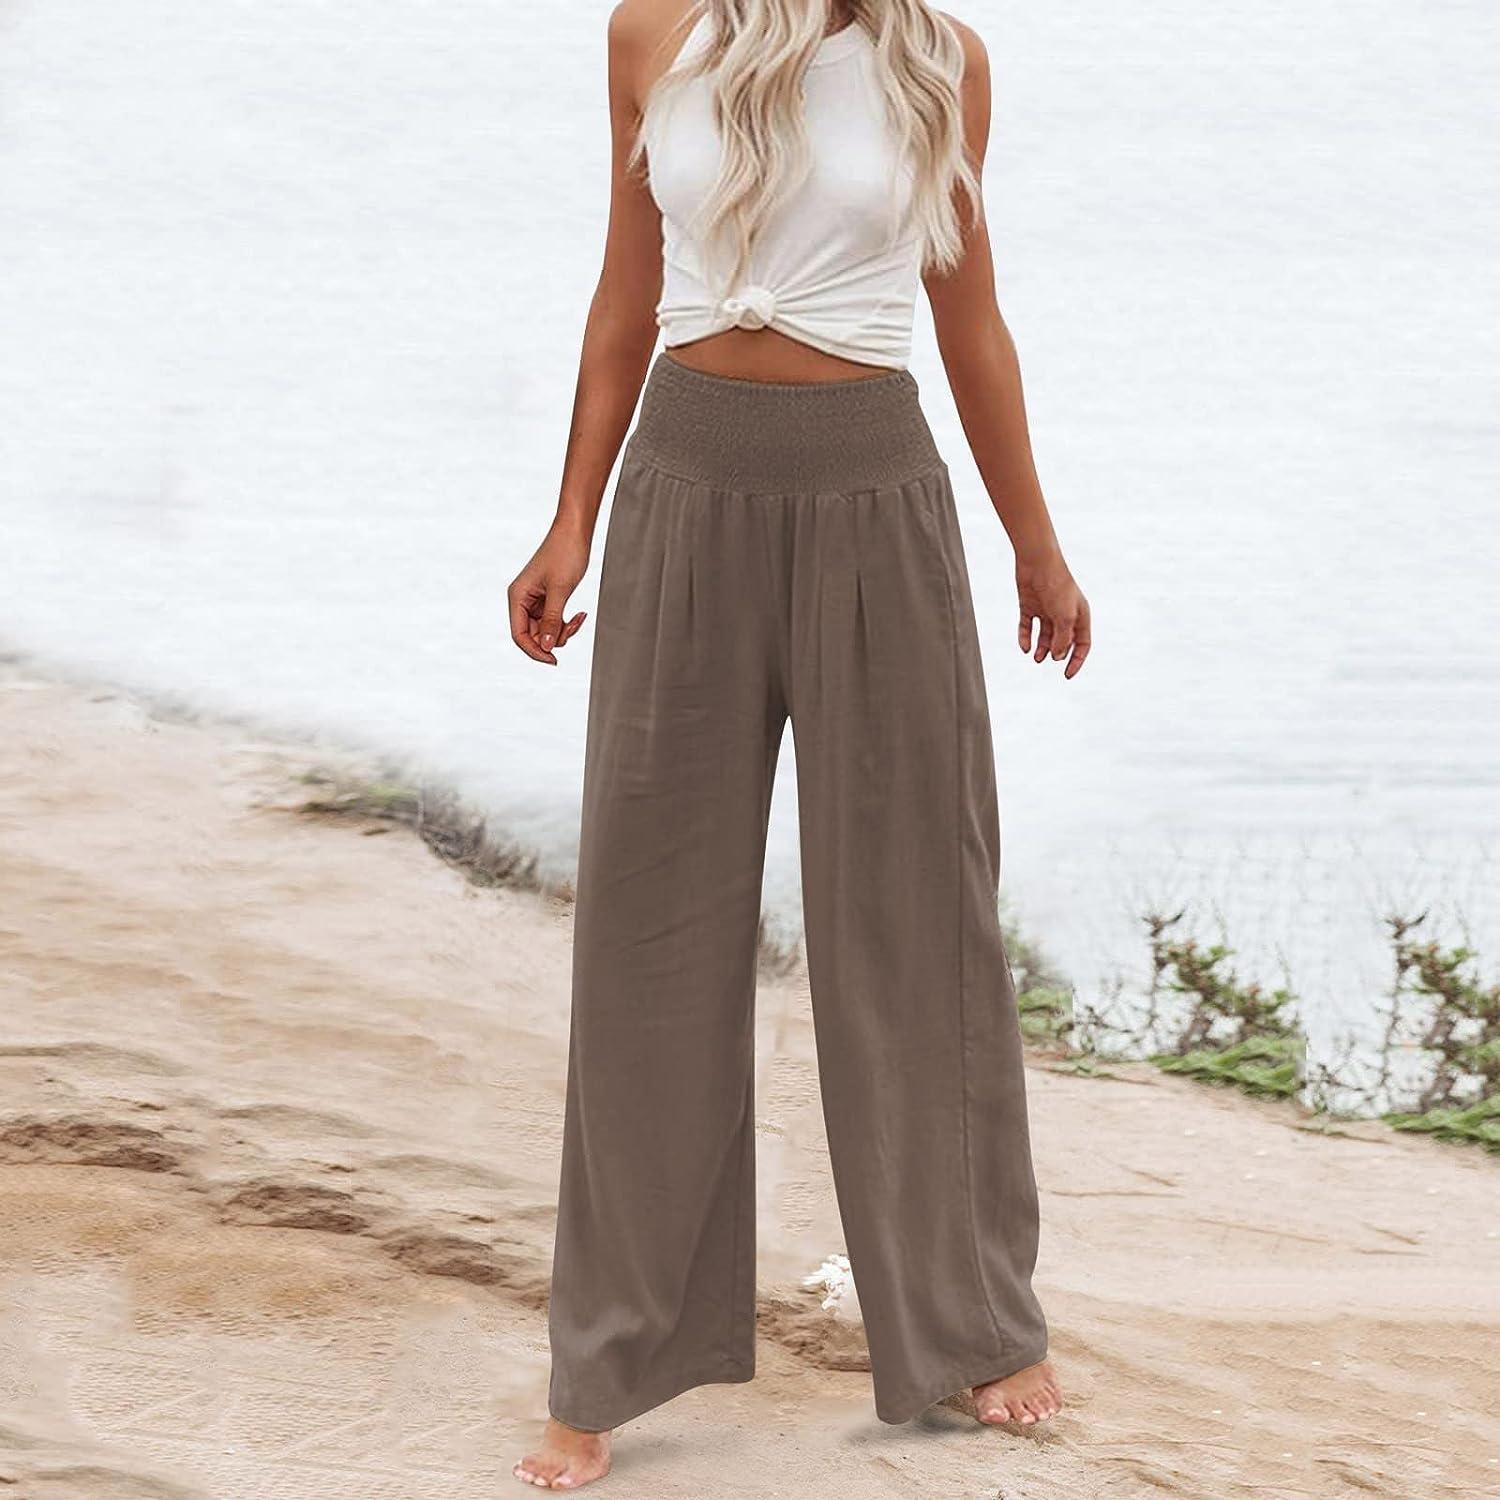 Flowy Beach Pants for Women high Waisted Summer Palazzo Pants Lounge  Trousers Cotton Linen Wide Leg Pants with Pockets X-Large A1-coffee